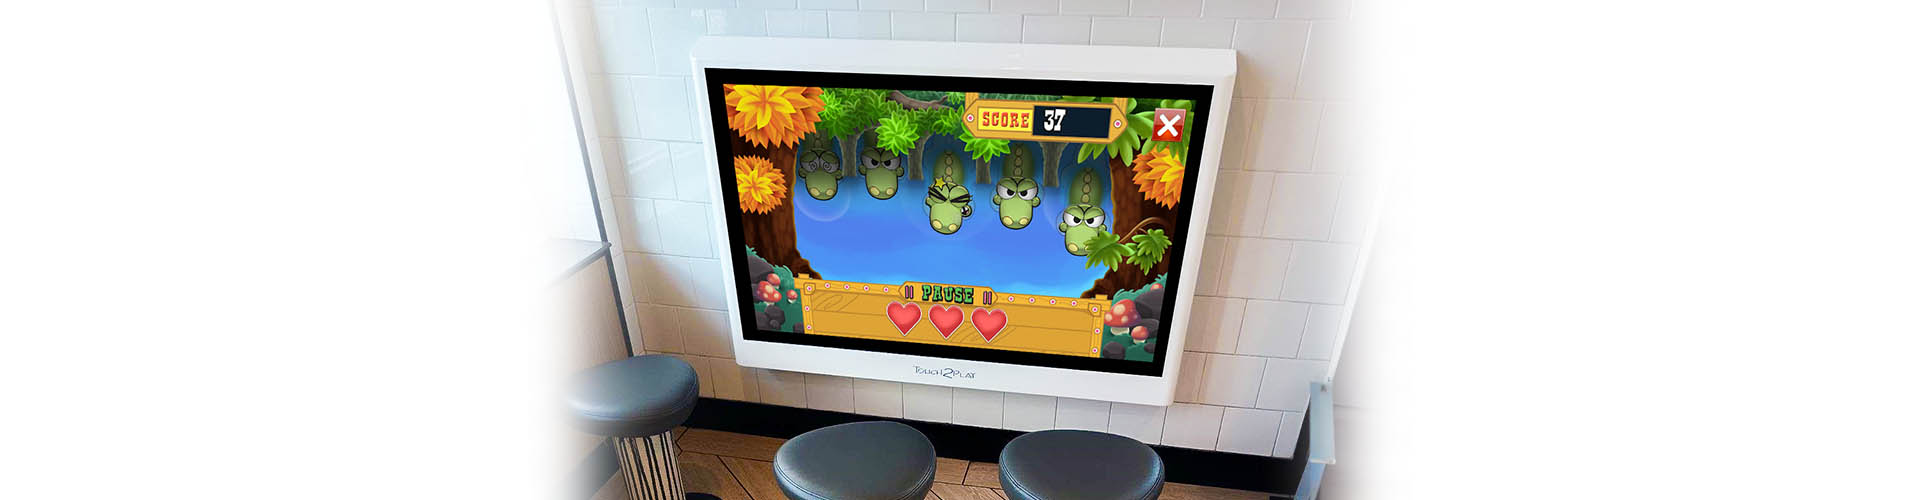 The Touch2Play Toddler Play Wall installed in a McDonald's restaurant.